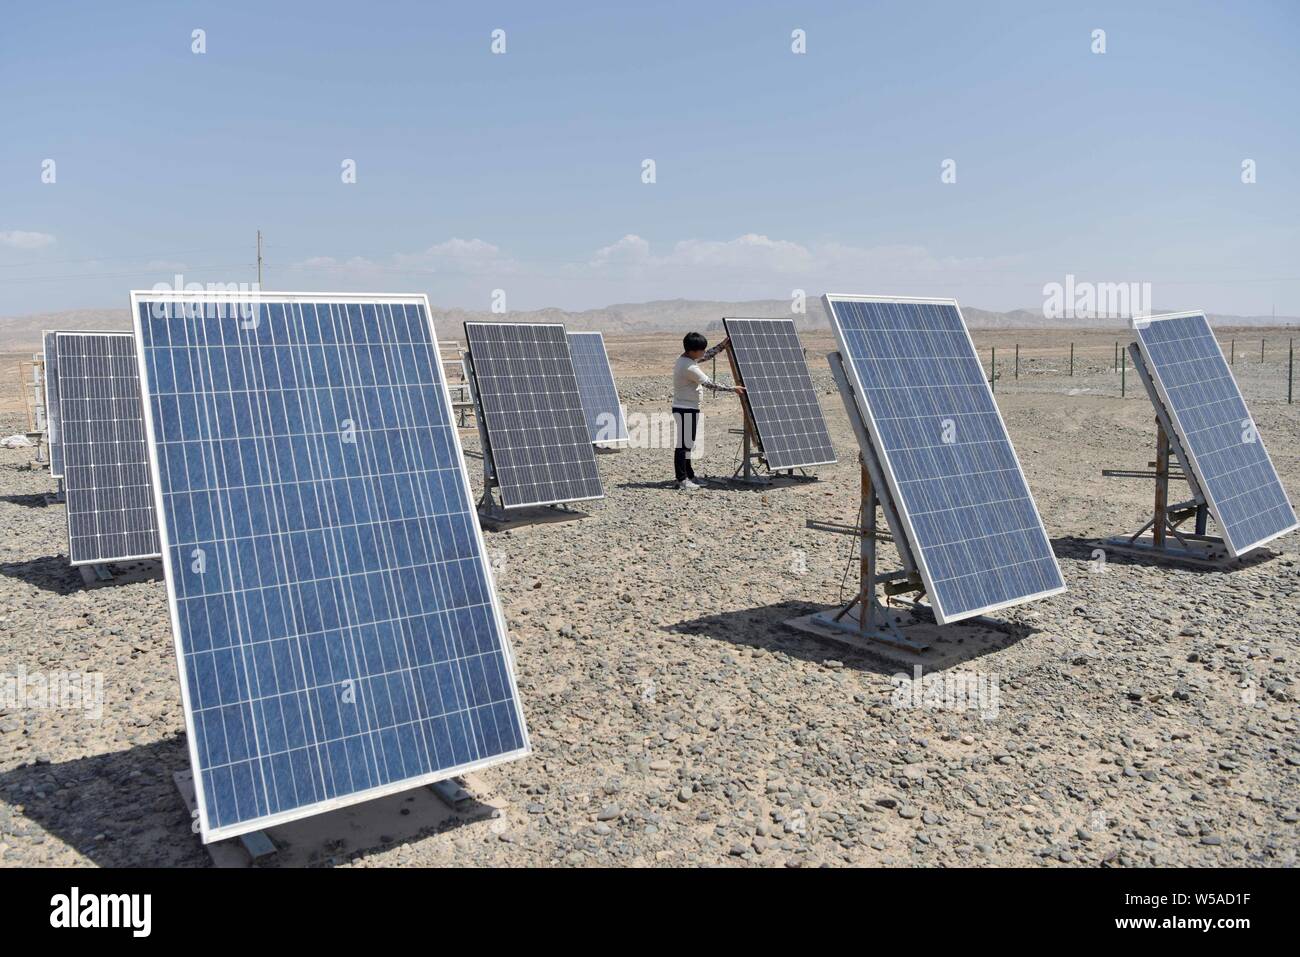 (190727) -- TURPAN, July 27, 2019 (Xinhua) -- Inspector You Liwu adjusts the angle of photovoltaic panel at a photovoltaic dry-heat test area on a large patch of land of the Xinjiang Turpan Natural Environment Experimental Research Center in Turpan, northwest China's Xinjiang Uygur Autonomous Region, July 17, 2019. You Liwu, 26, has been an outdoor-exposure test inspector of the Xinjiang Turpan Natural Environment Experimental Research Center since graduation two year ago. His work is to inspect test items and monitor and gather data, who would be exposed to the torrid test land for up to five Stock Photo